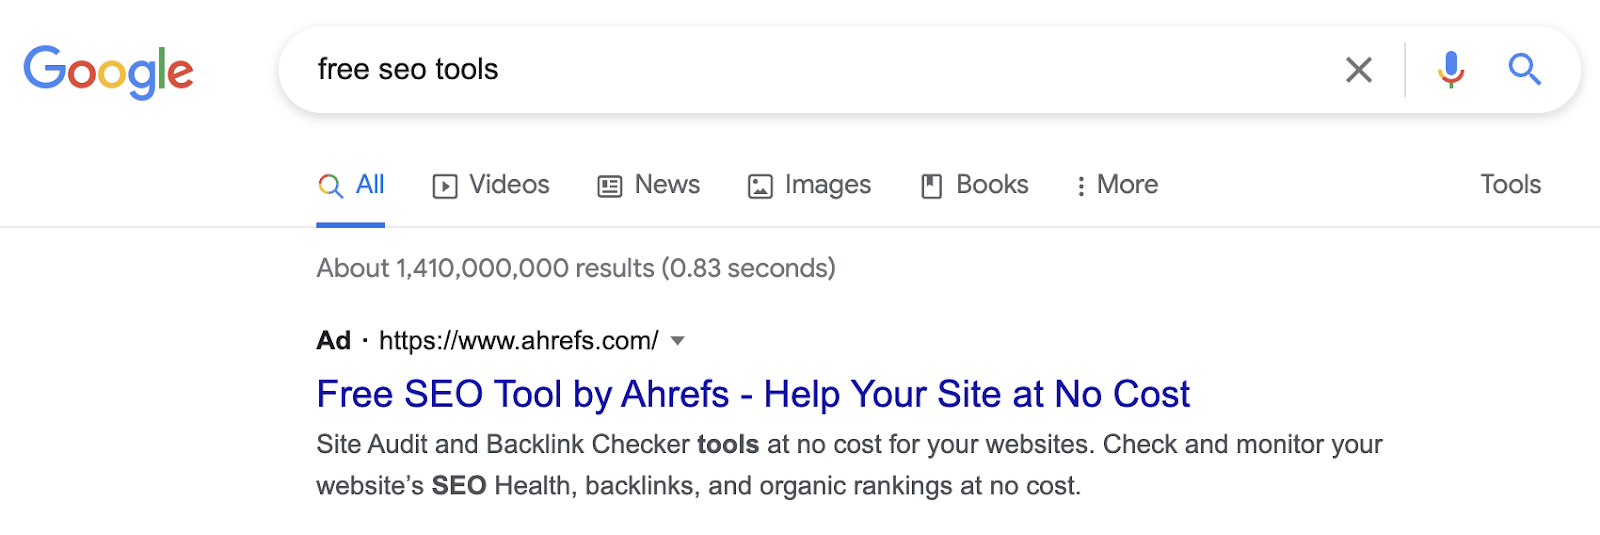 Example of us using Google Ads to promote our list of free SEO tools using the "pull" strategy
